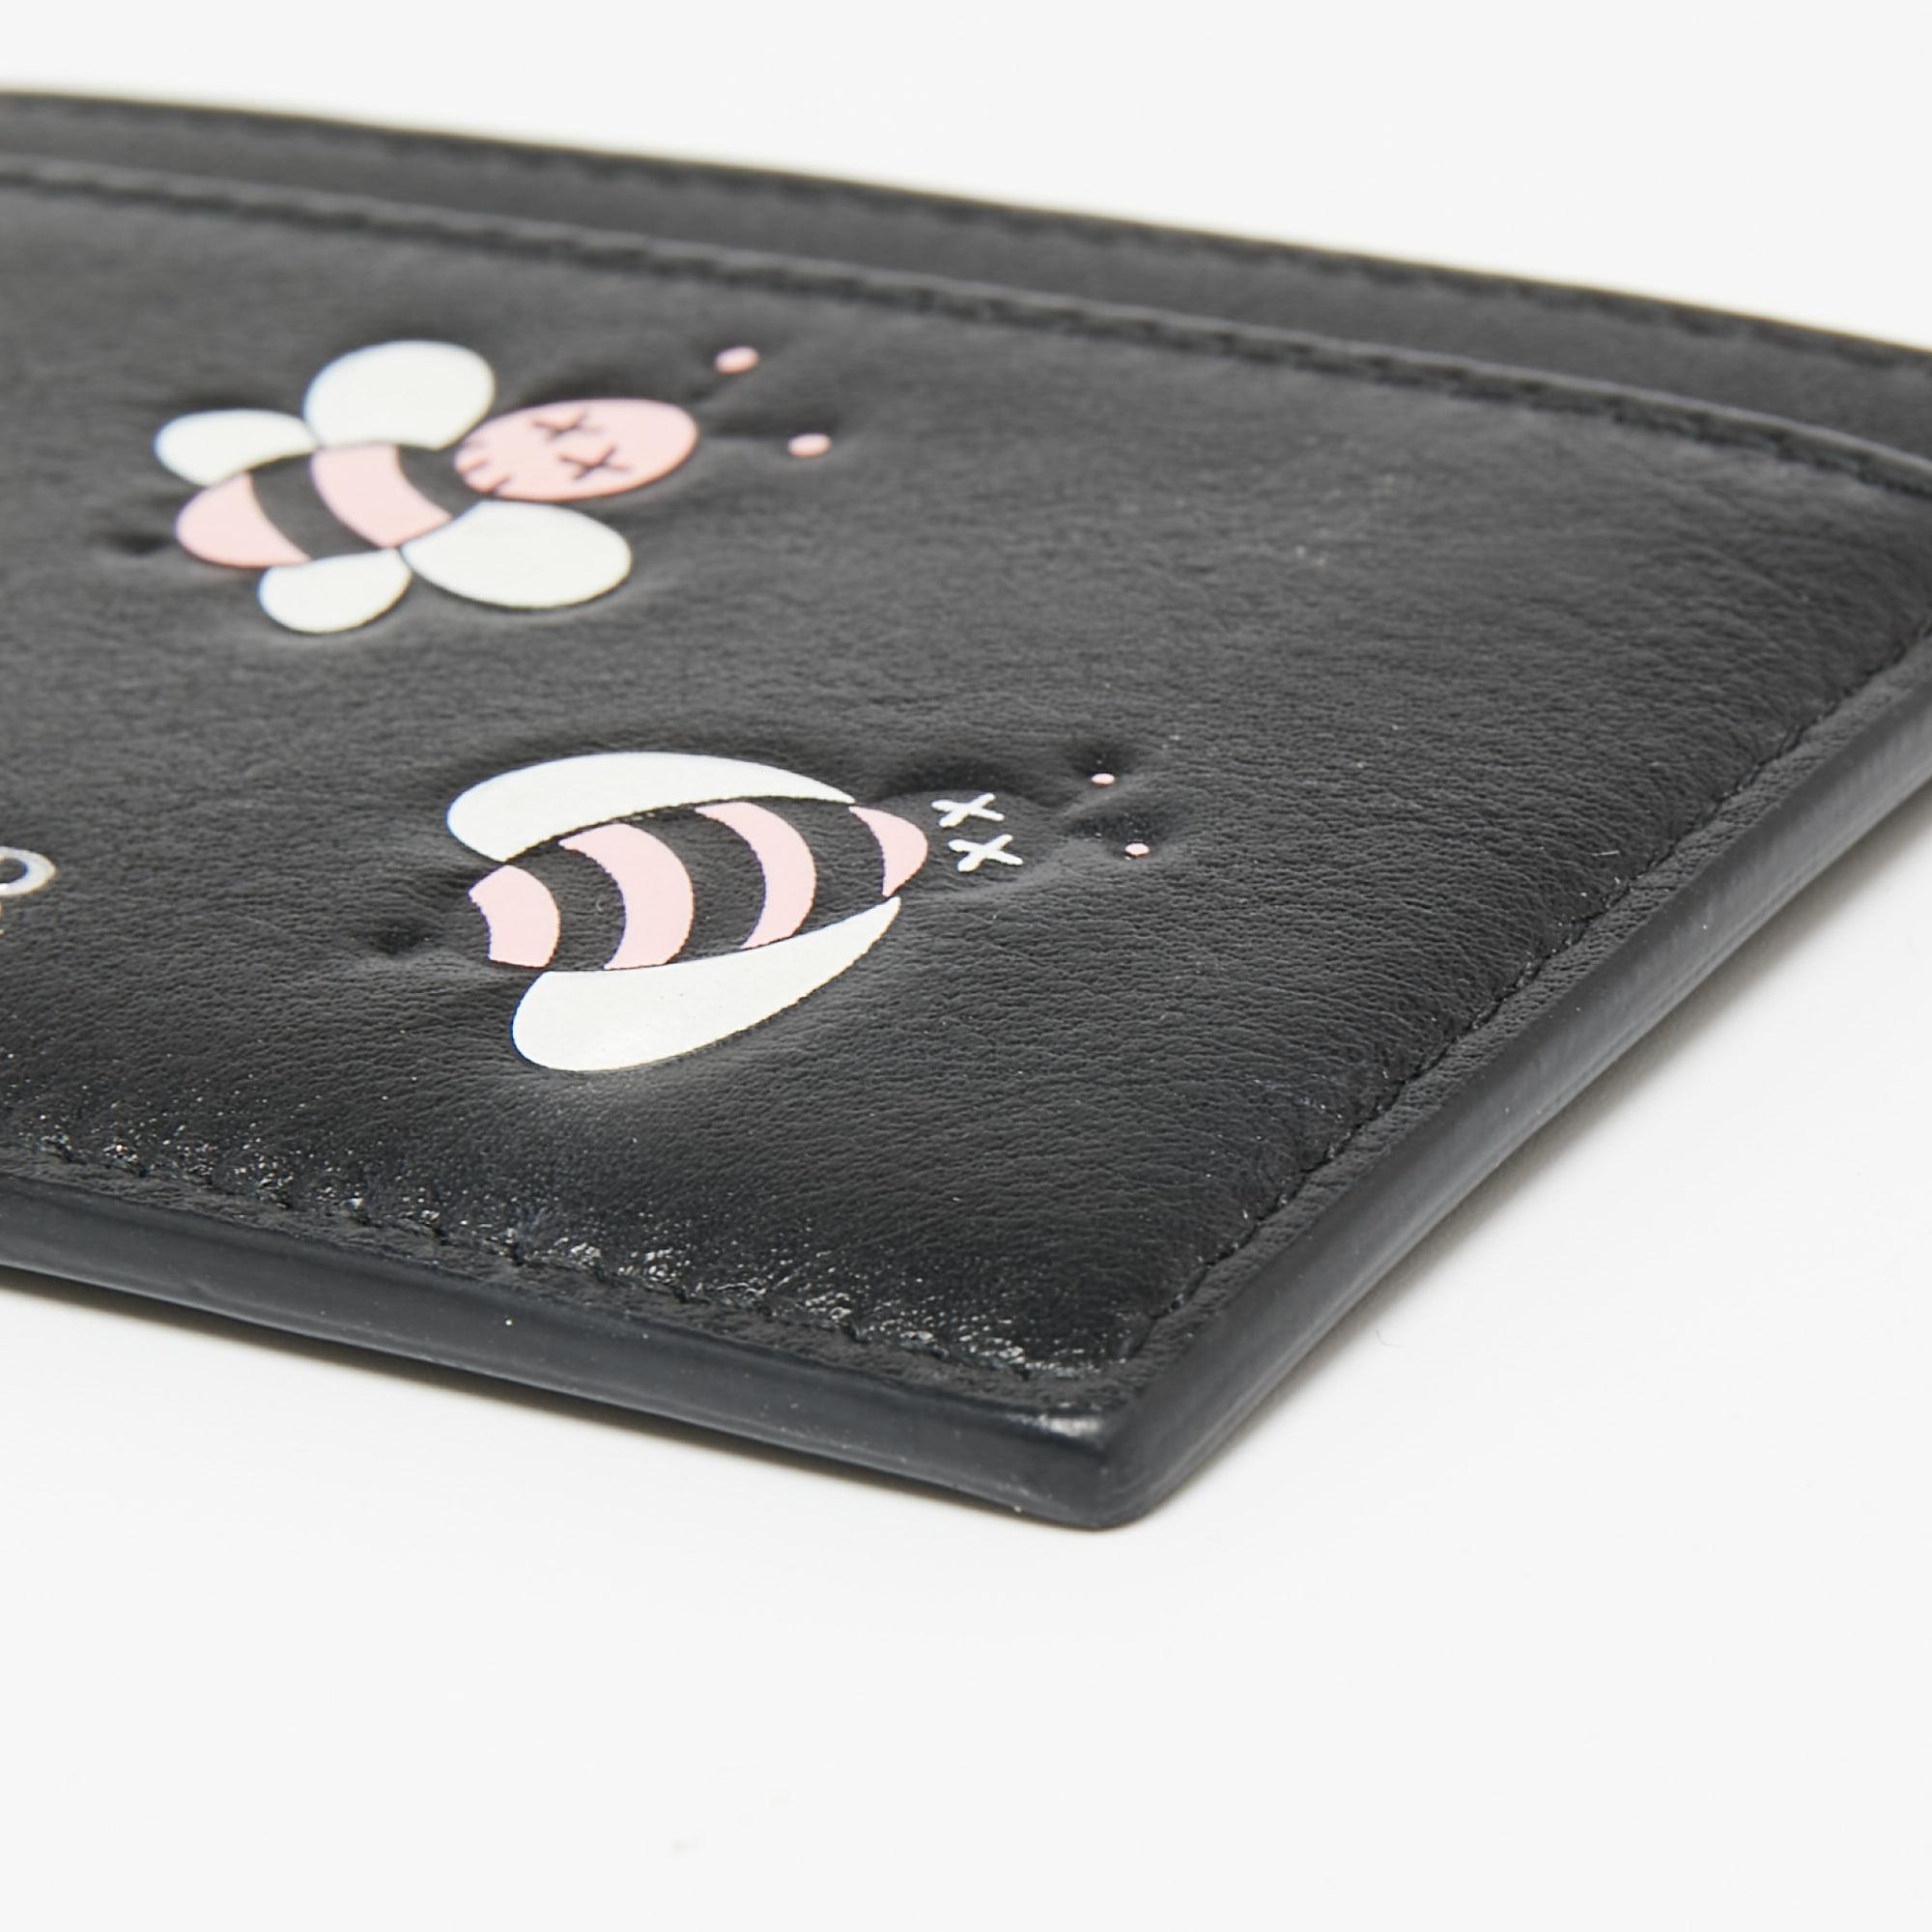 Women's Dior x Kaws Black/Pink Leather Bees Cardholder